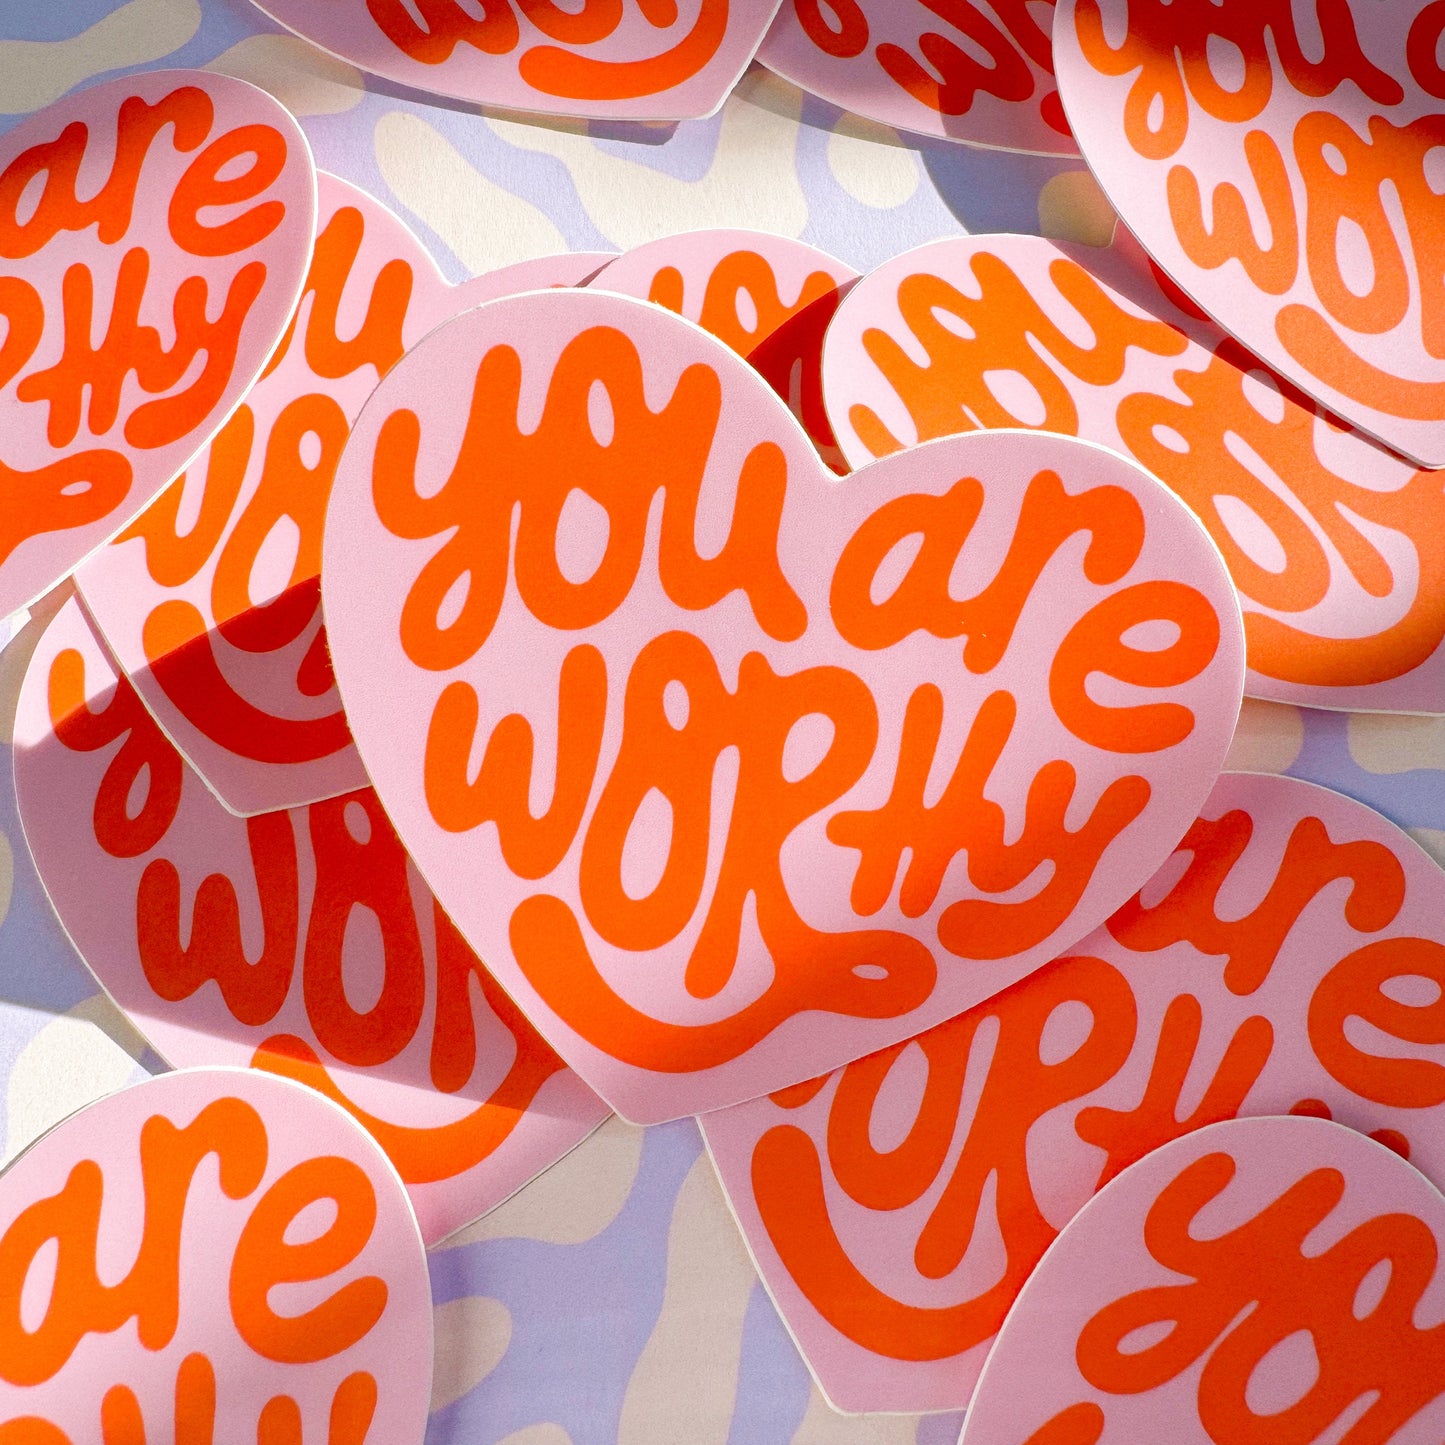 You Are Worthy Heart Sticker